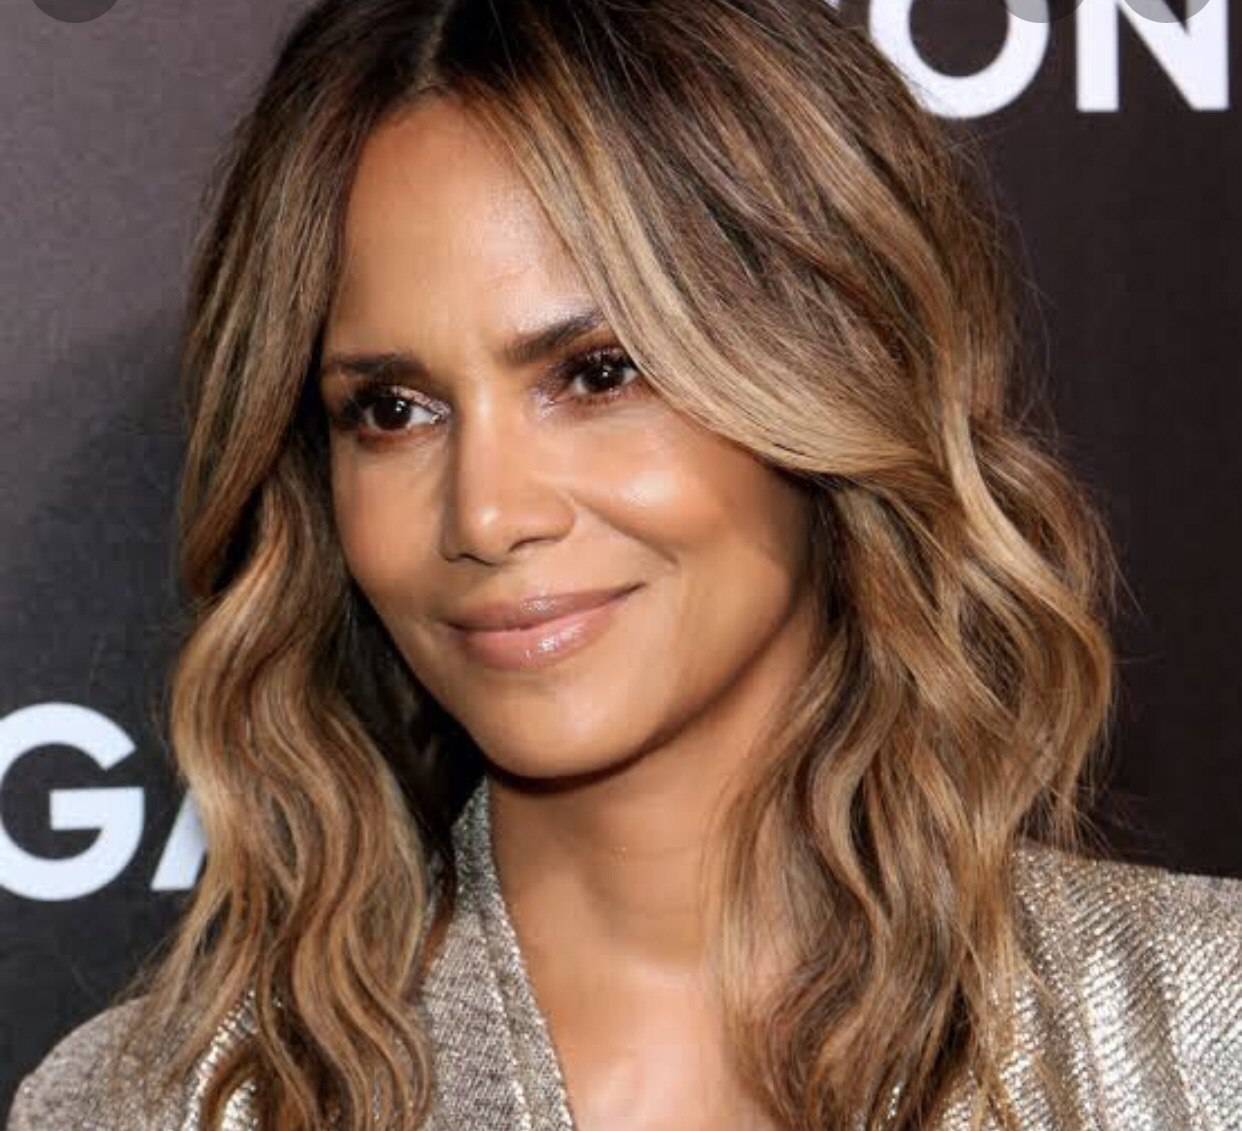 Halle Berry Says Her Kids Are the Reason She Directed New Film ‘Bruised’